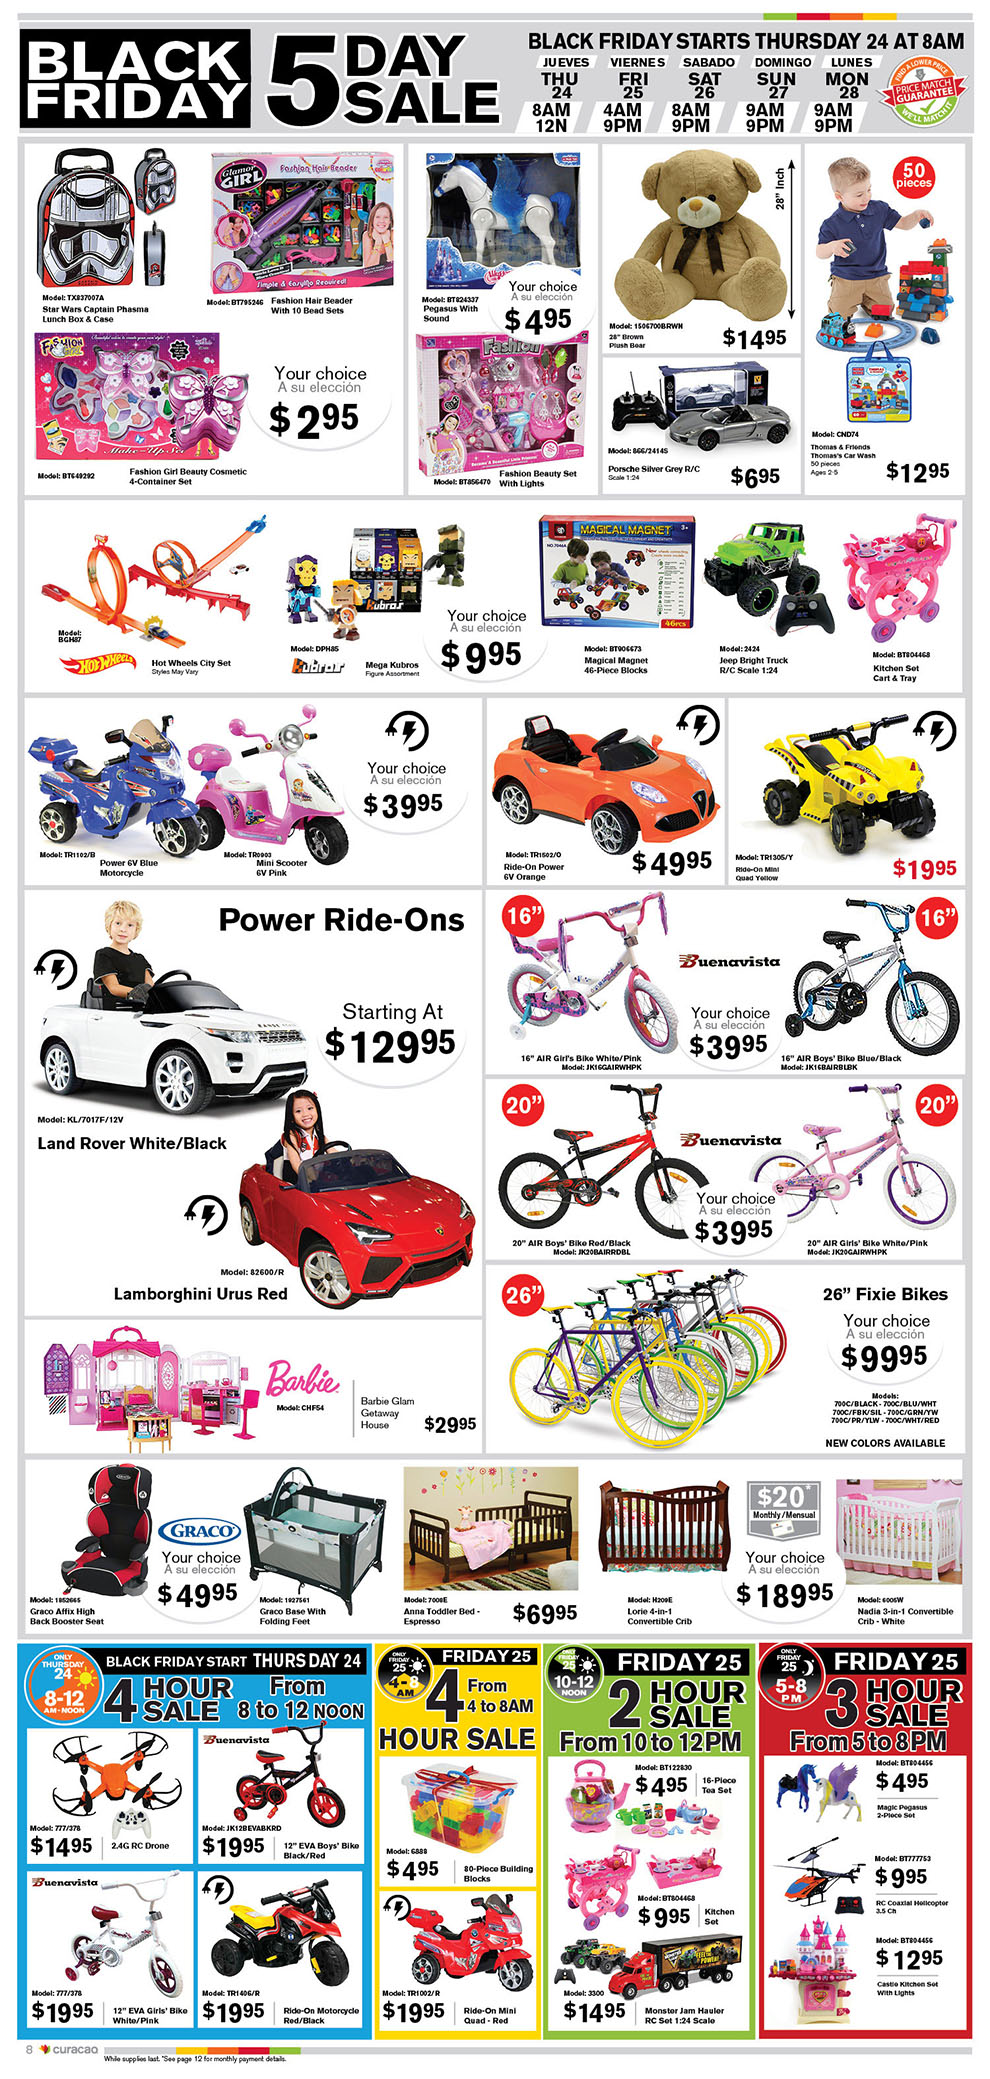 Curacao 2016 Black Friday Ad Page 8